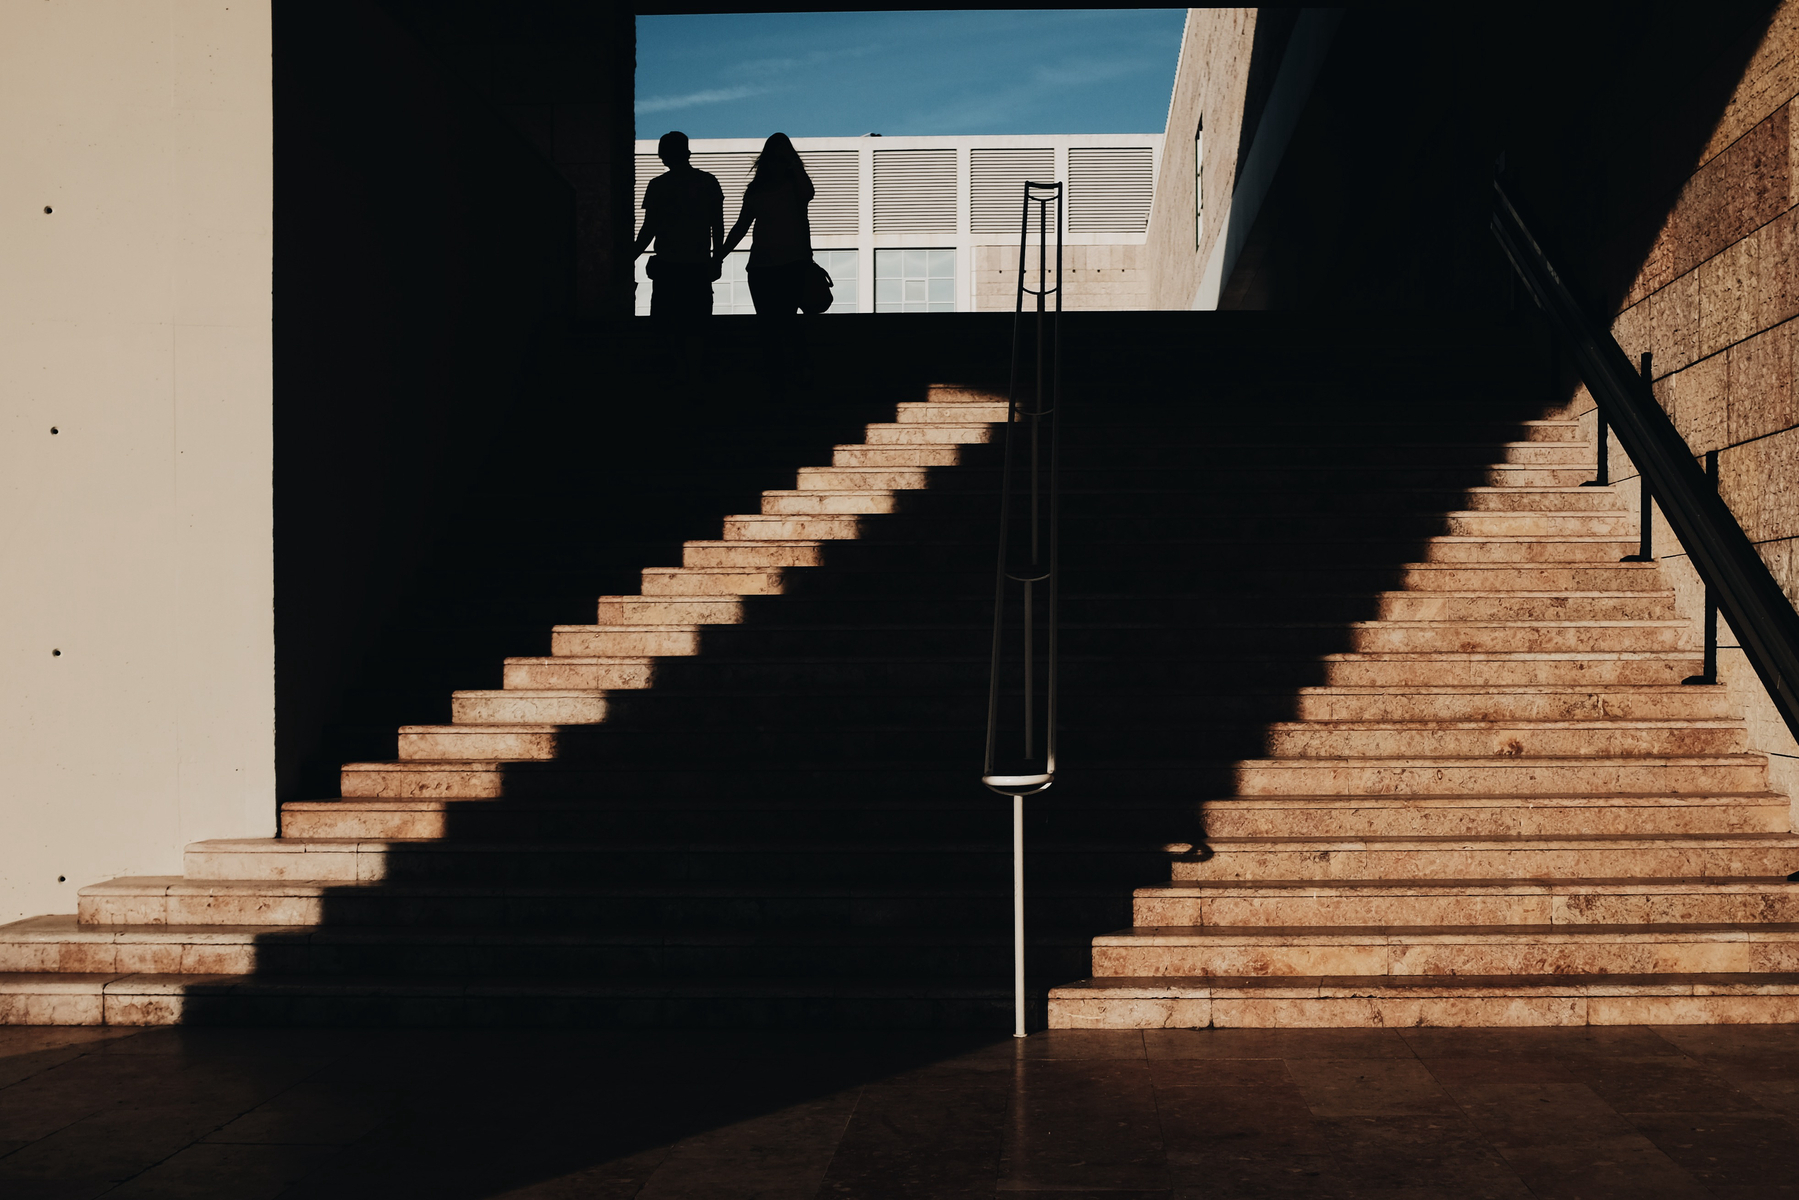 A couple at the top of a stairway.